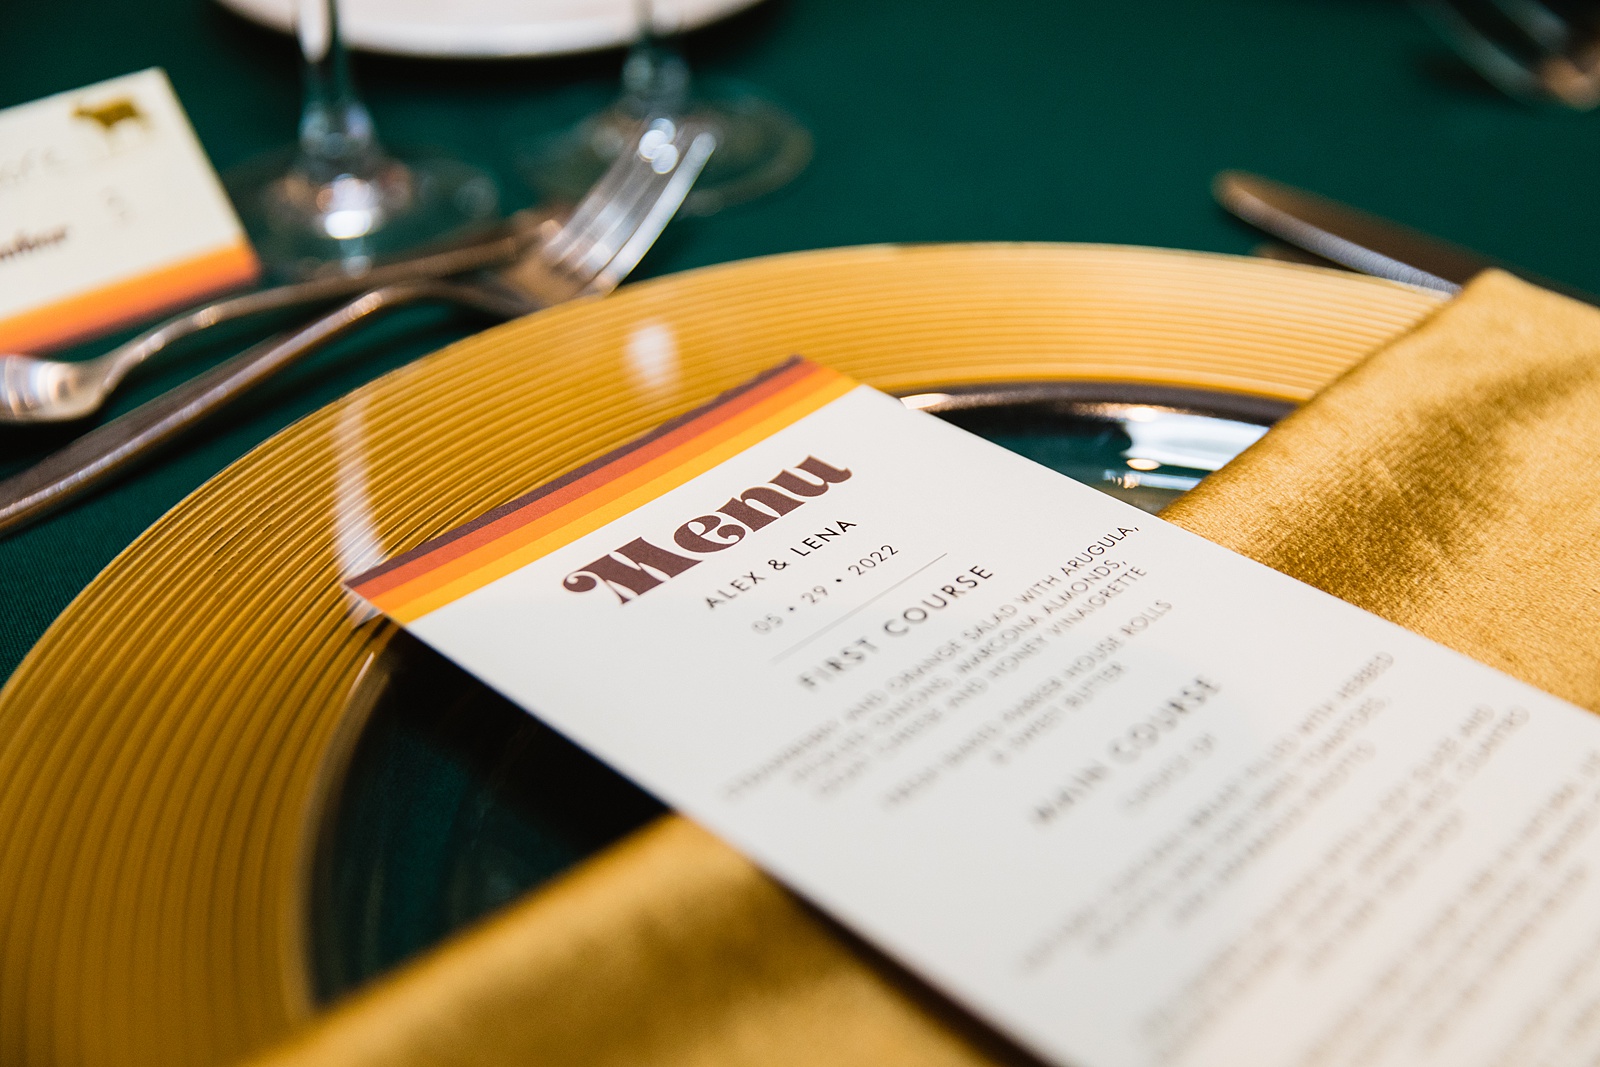 Retro Mid Century Modern menu and place settings at Mountain Shadows Resort wedding reception by Paradise Valley wedding photographer PMA Photography.